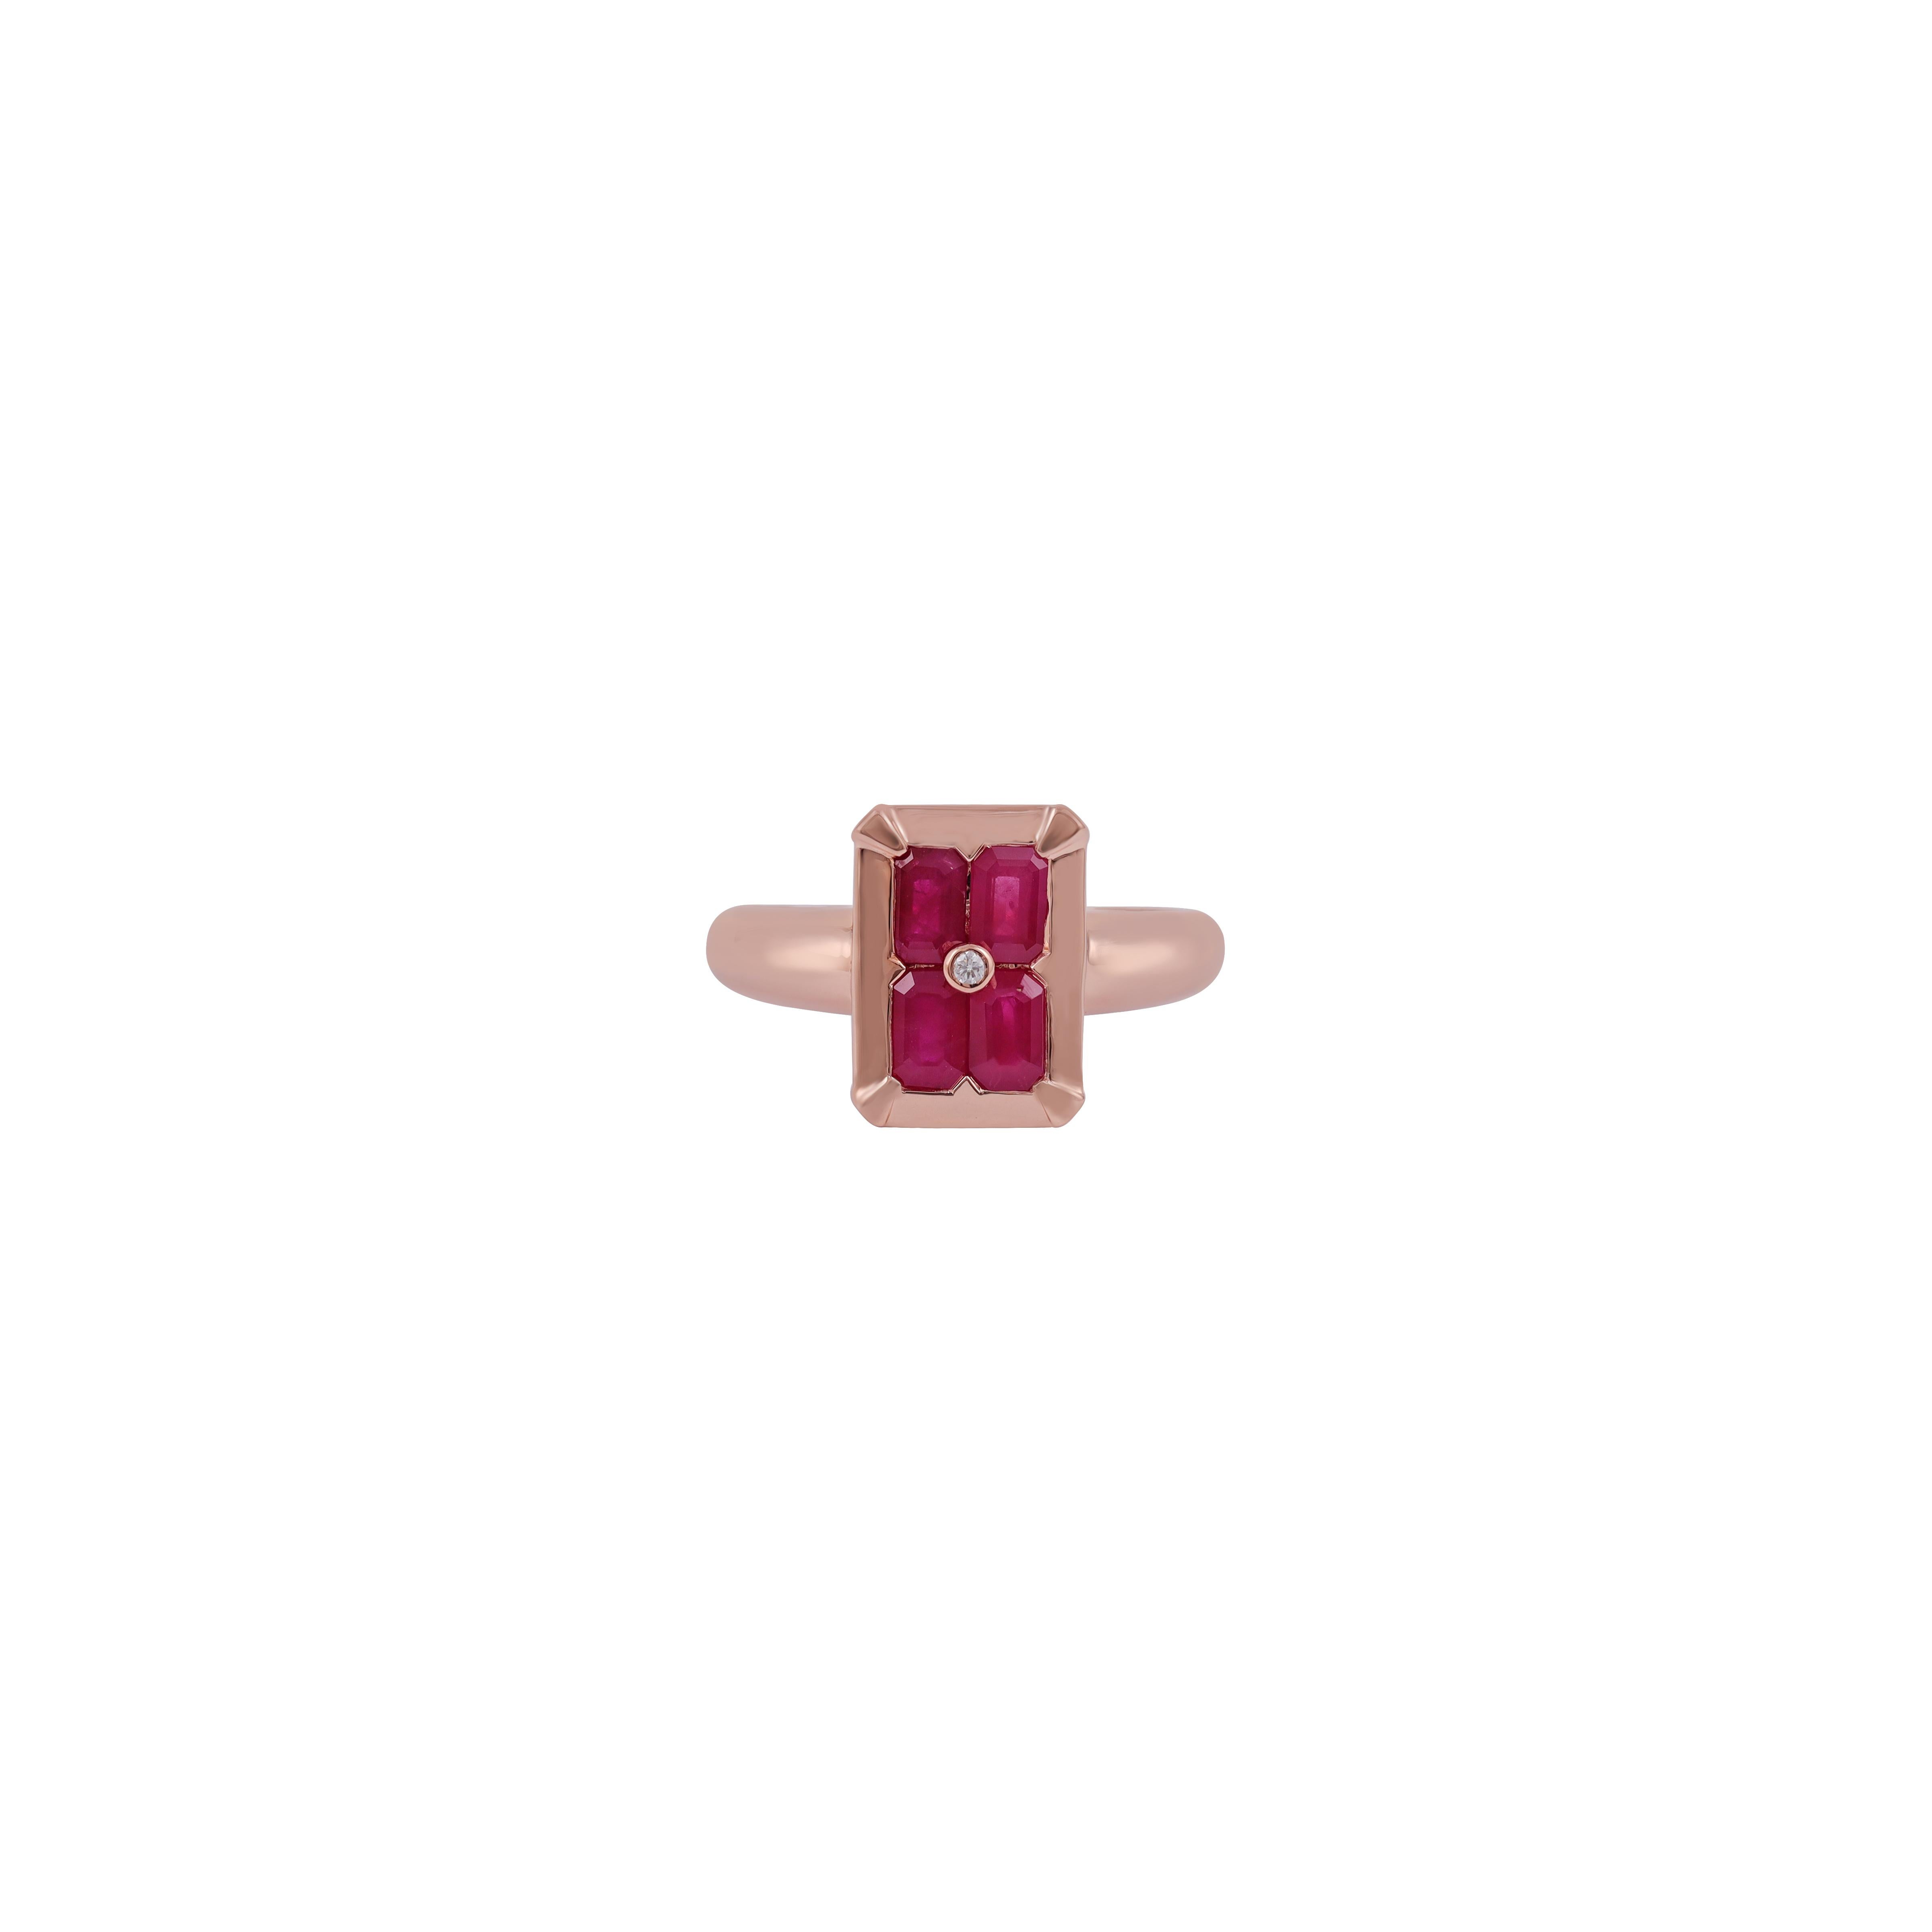 Its an elegant ring studded in 18k gold with 4 pieces Mozambique natural ruby weight 1.46 carat & Diamond  weight 0.02 carat , this entire ring studded in 18k gold weight 3.70 grams, ring size can be change as per the requirement.